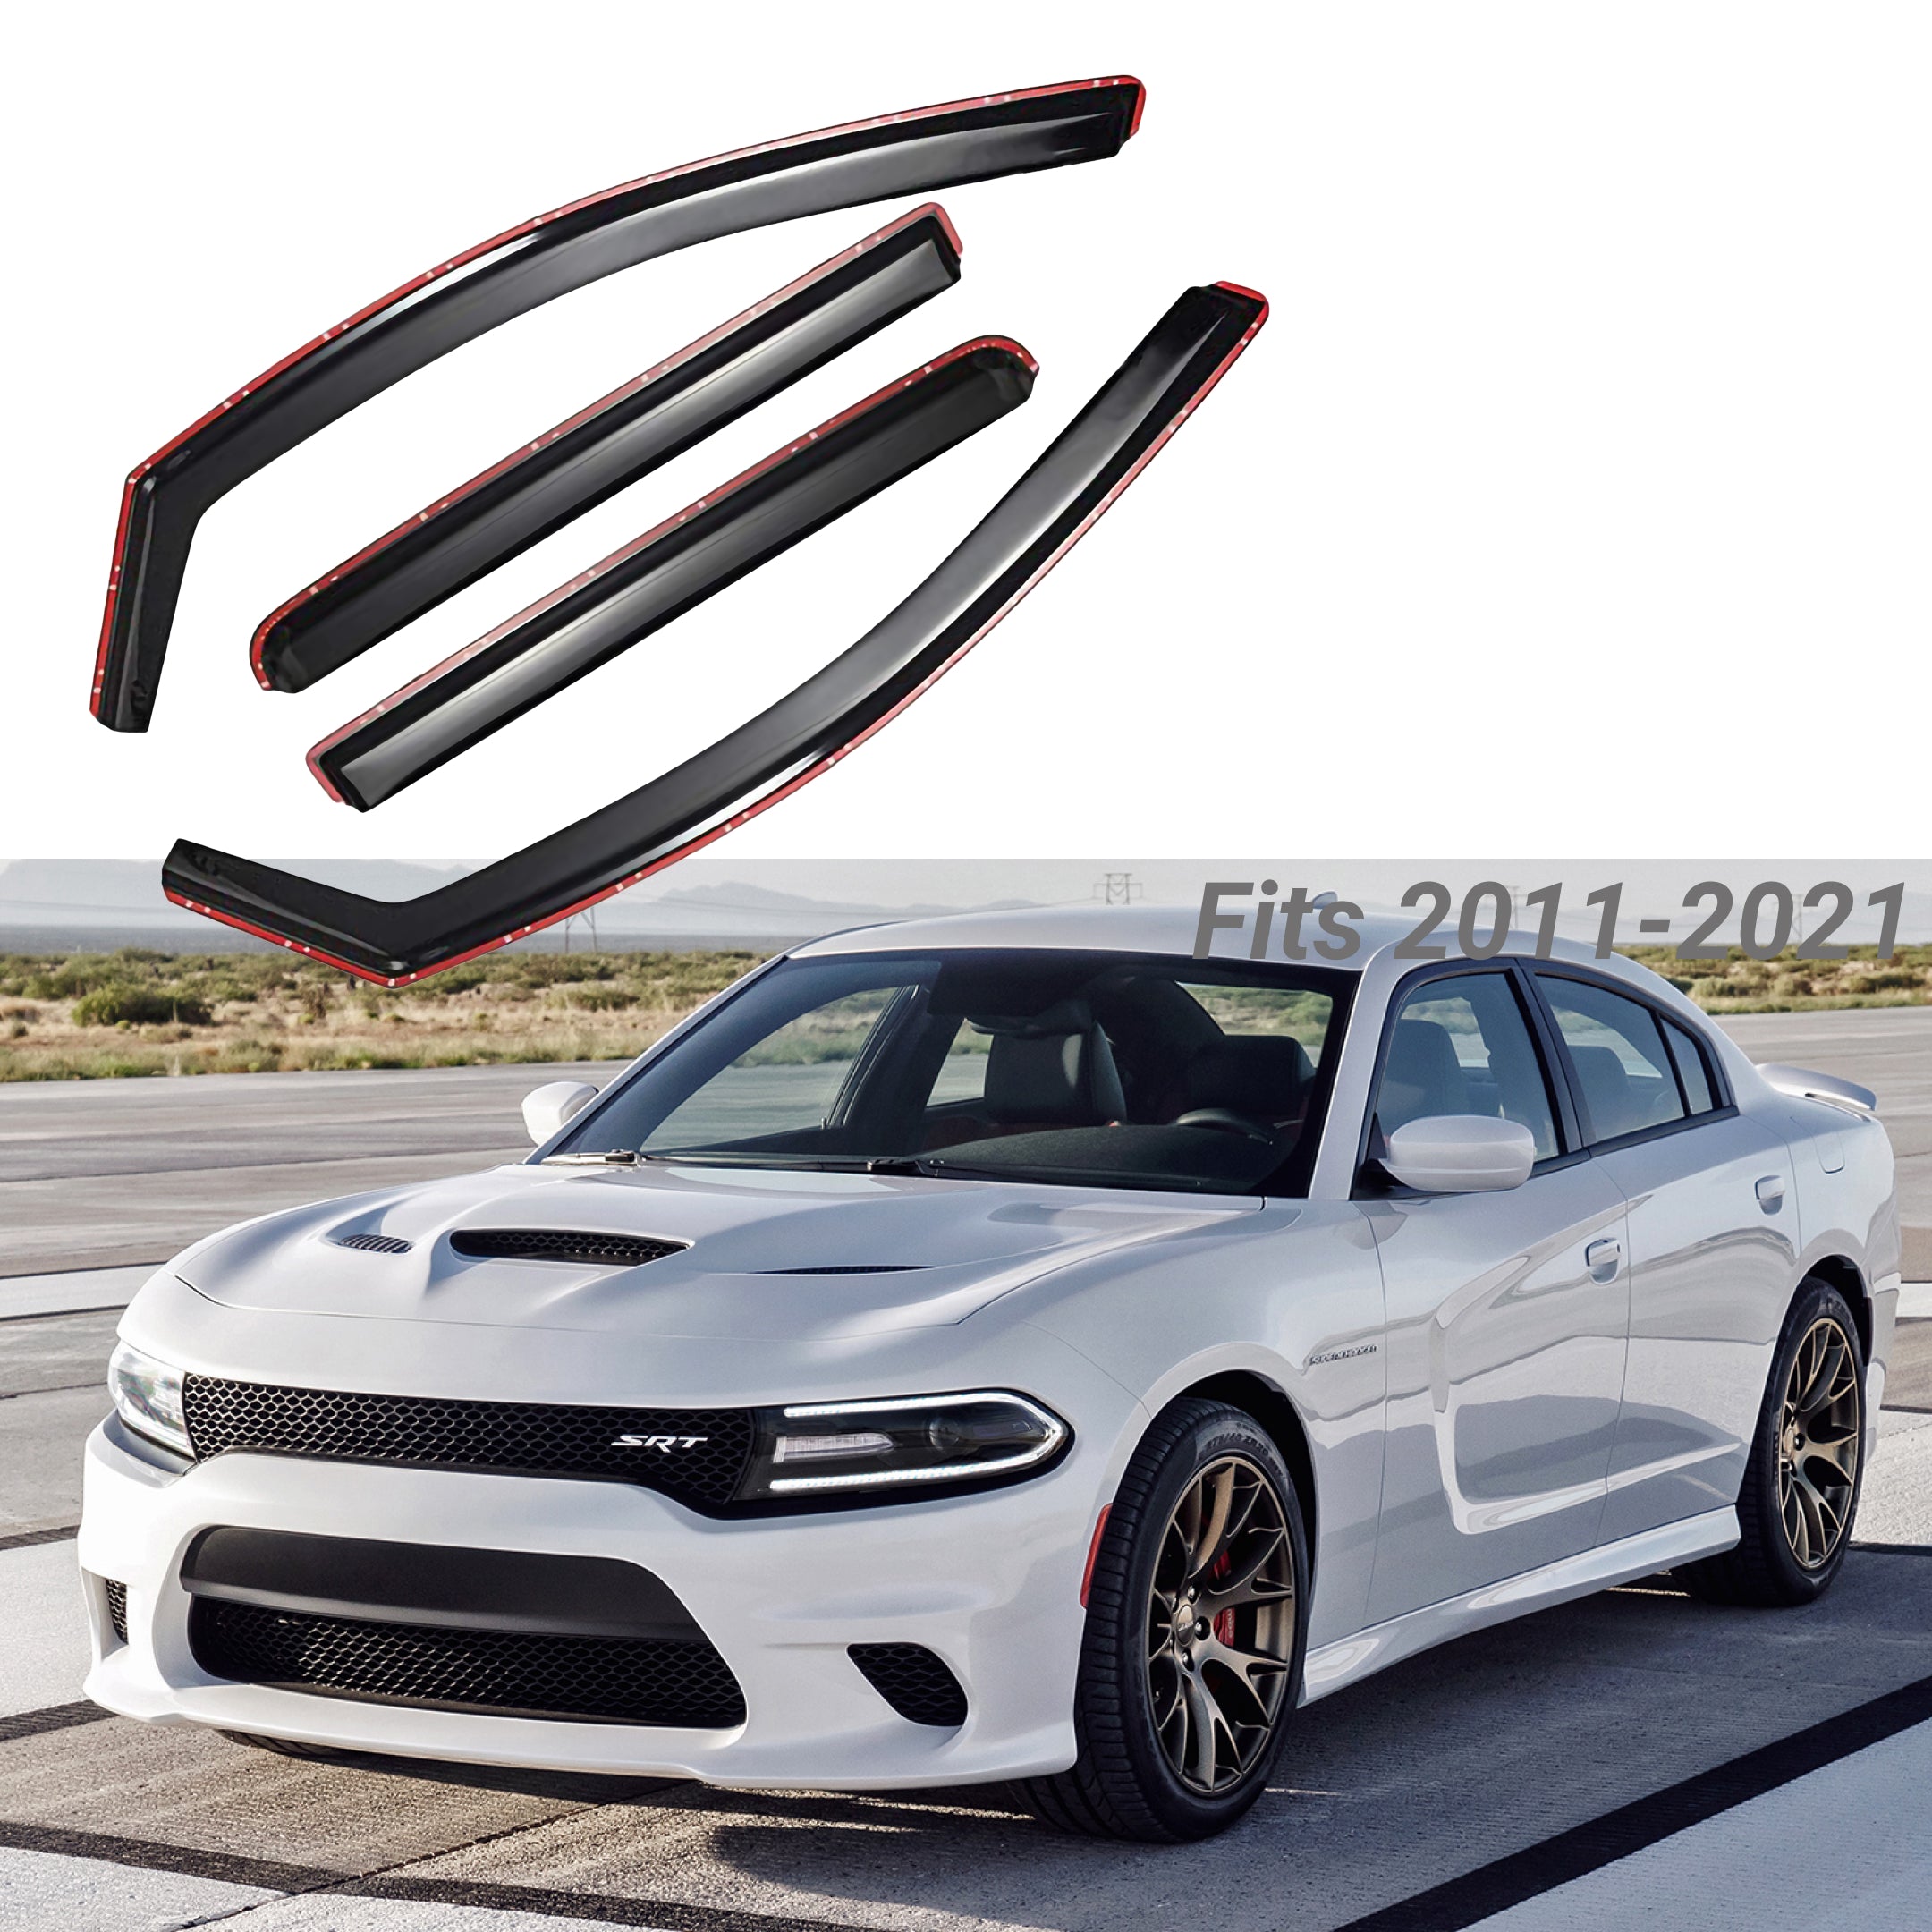 Fit 2011-2021 Dodge Charger In-Channel Vent Window Visors Rain Sun Wind Guards Shade Deflectors